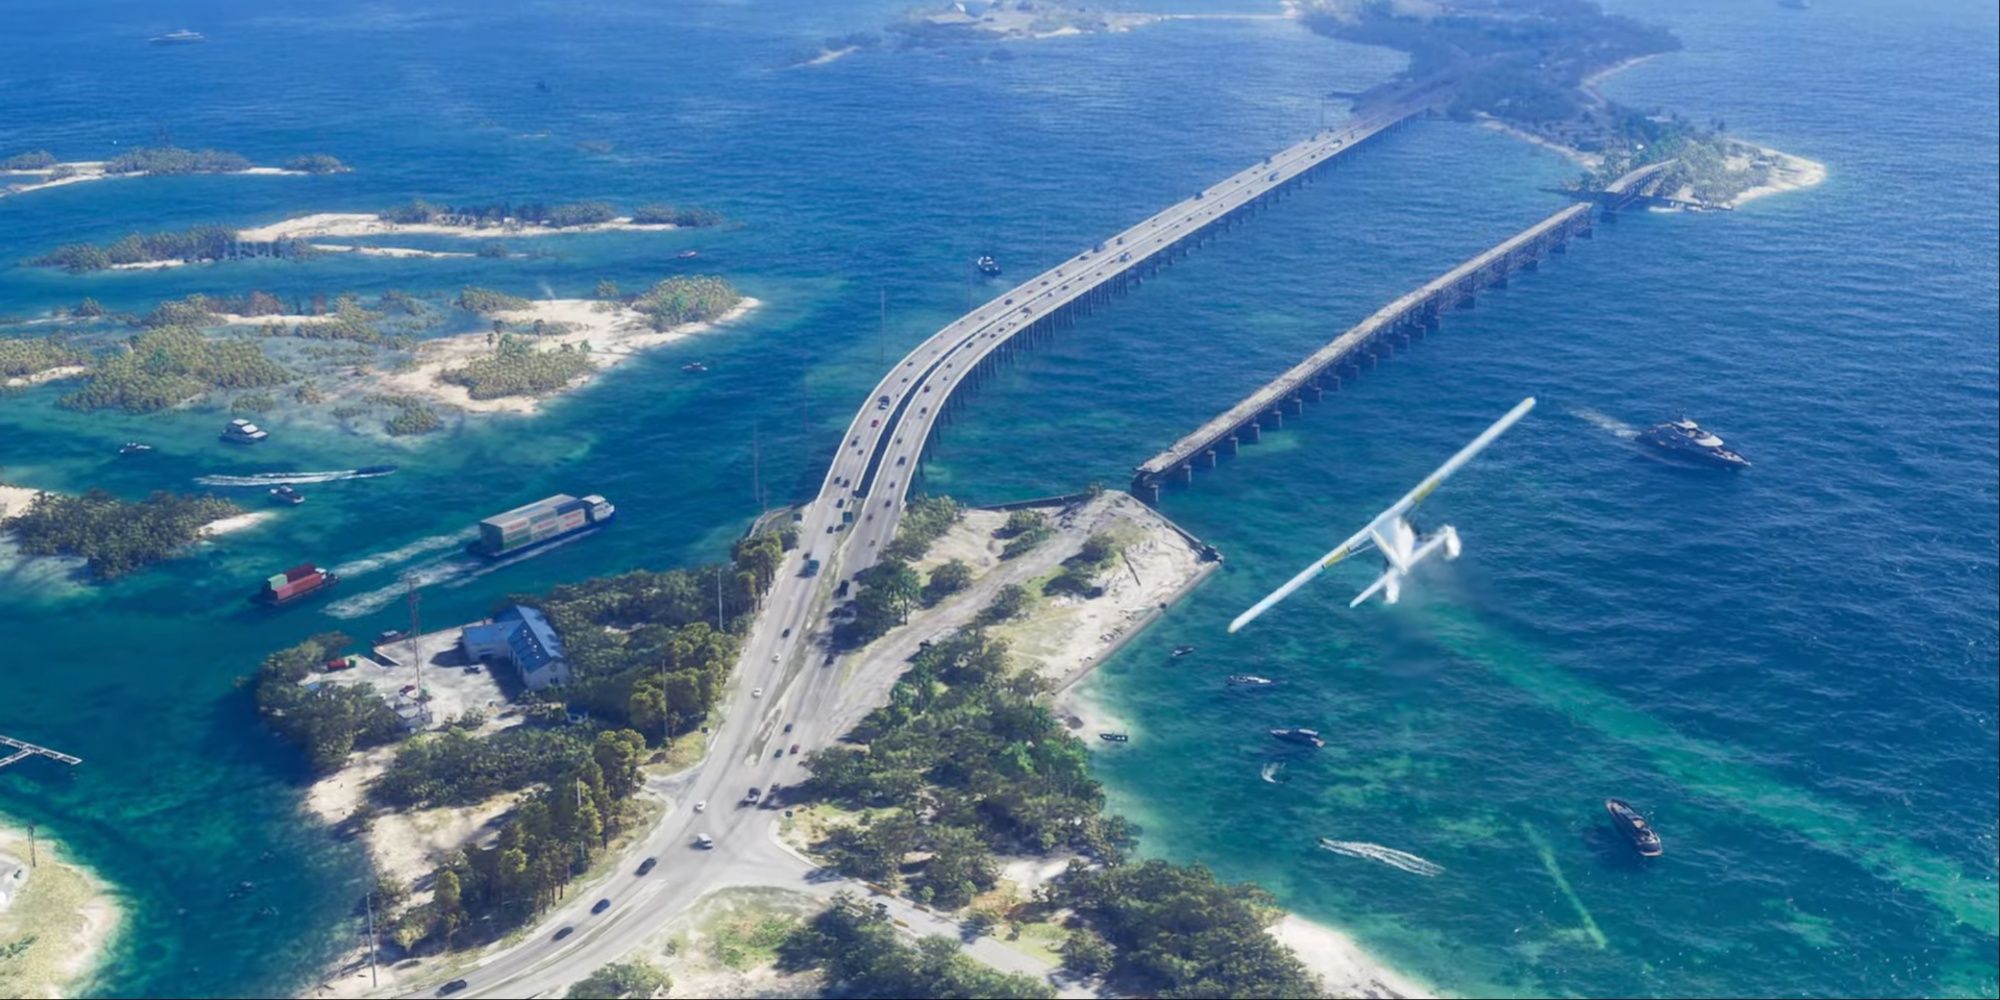 An airborne seaplane making a turn over a highway system going across the ocean.